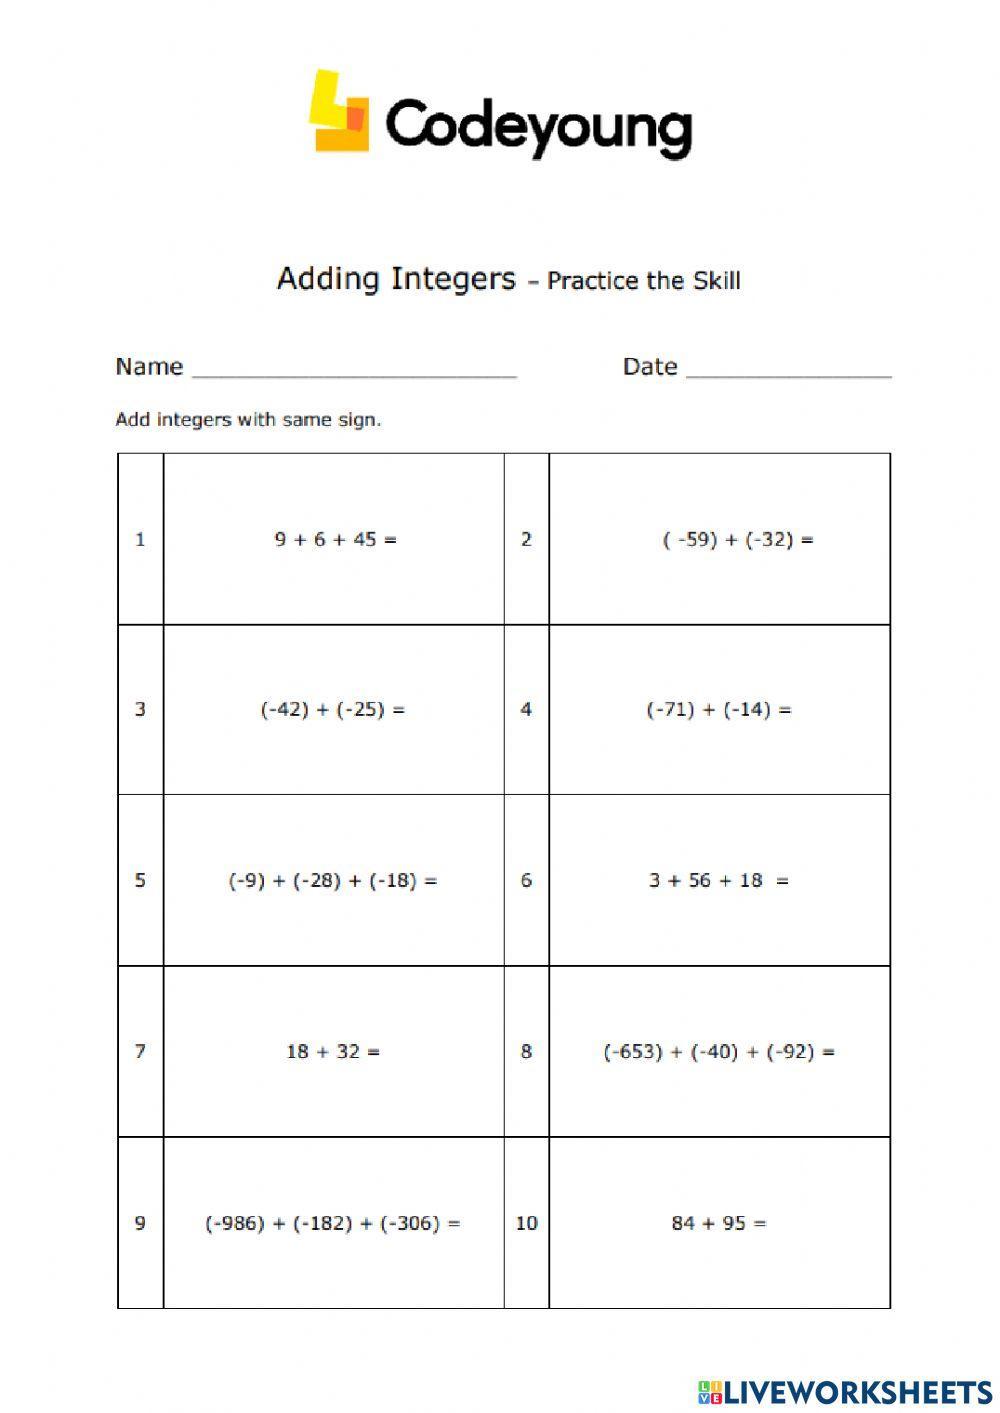 An Introduction to Addition of Integers Advanced